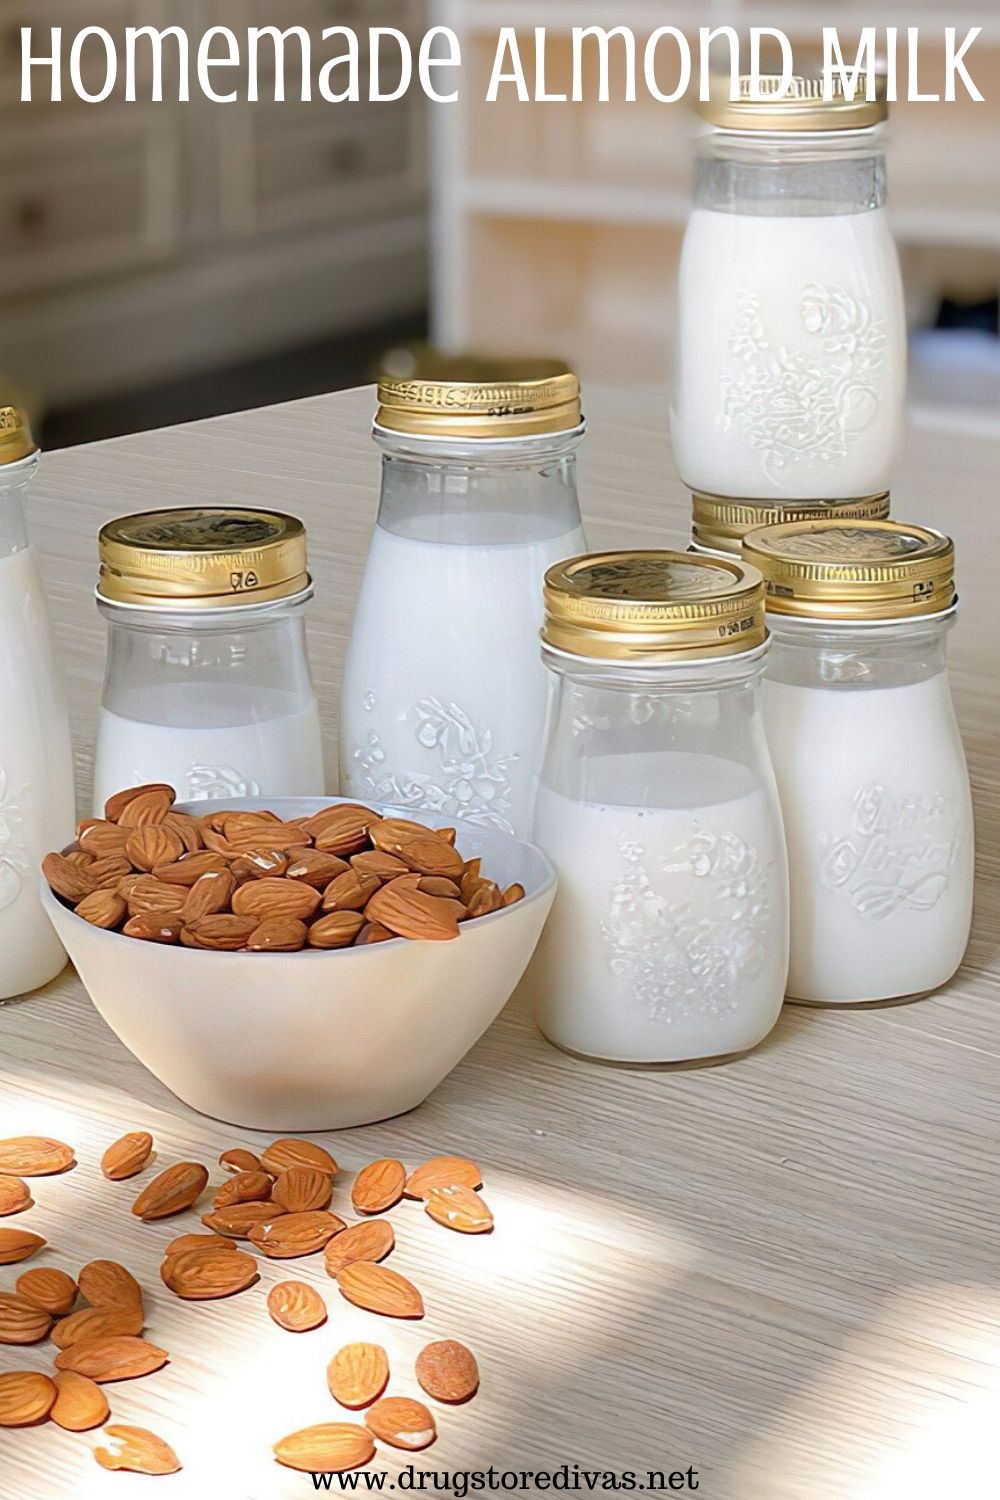 A bowl of almonds surrounded by bottles of milk and the words 